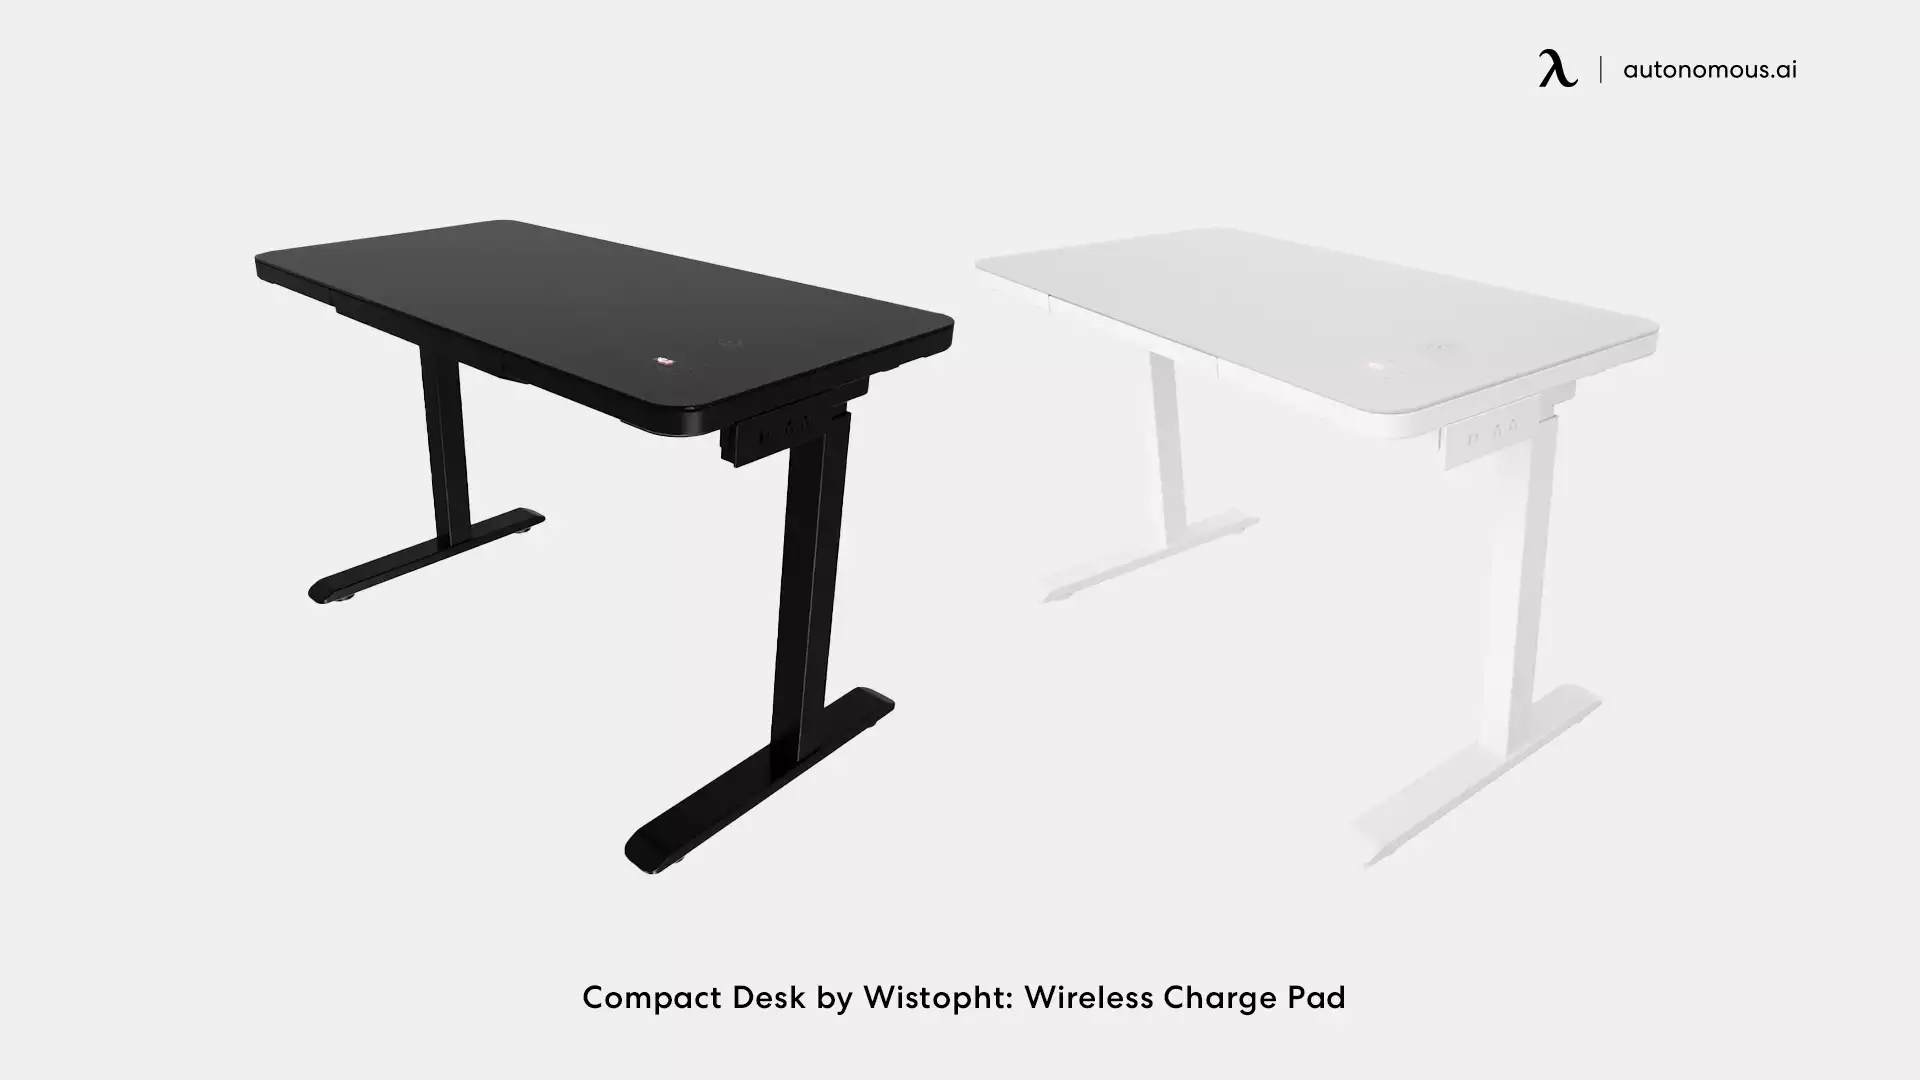 Wistopht CompactDesk: Touchscreen Control & Wireless Charging Pad